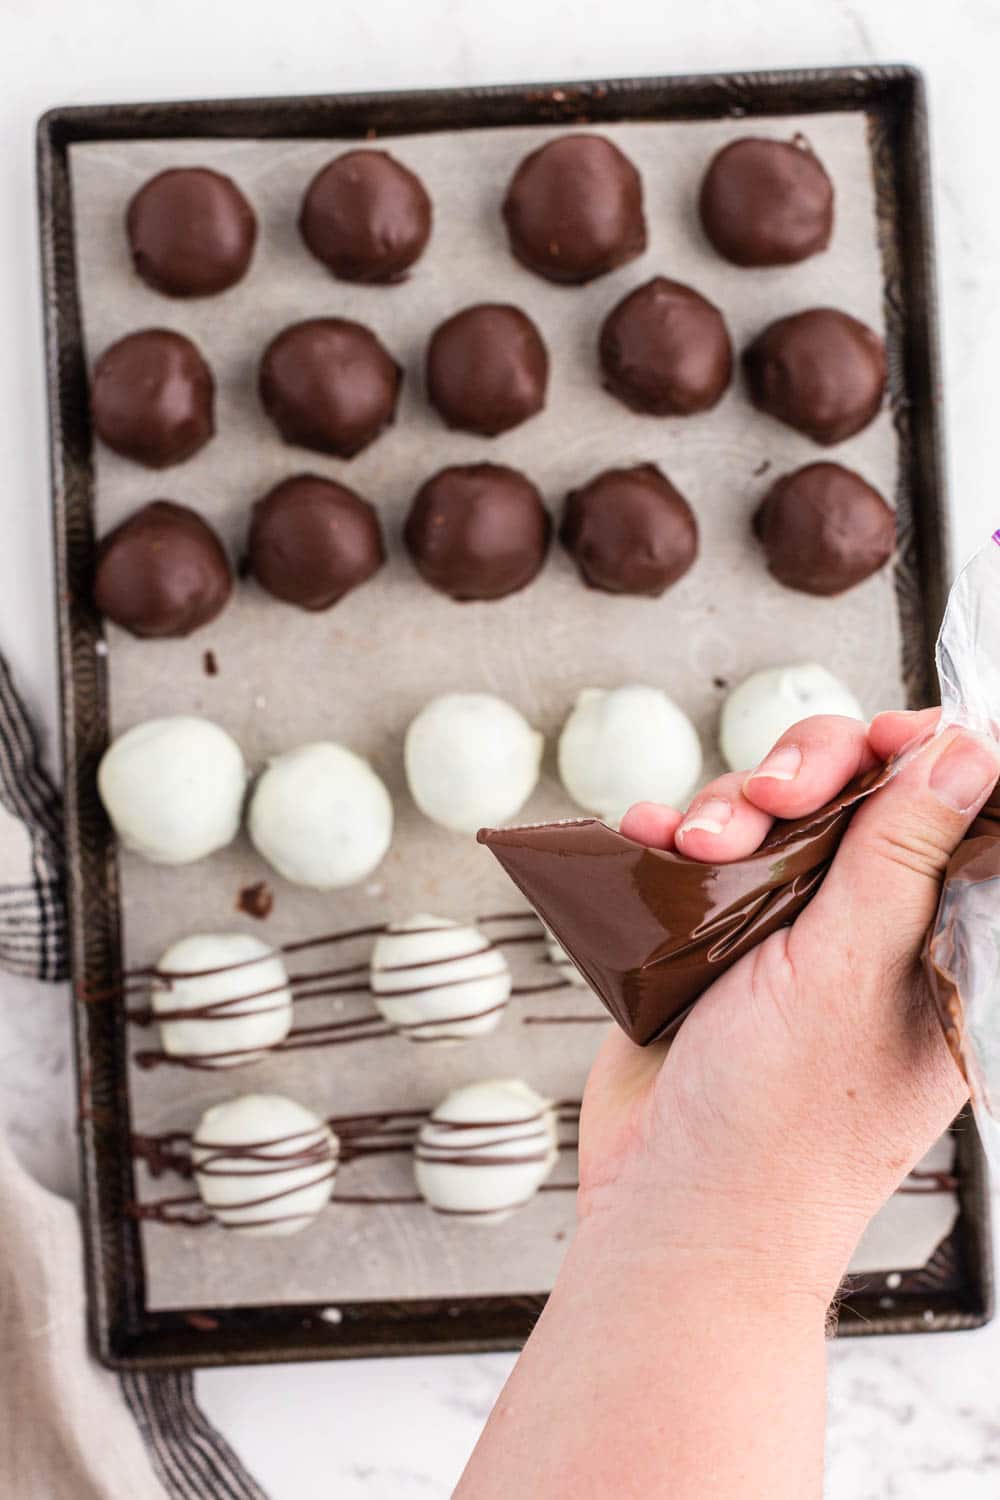 Chocolate coated Oreo balls, melted dark chocolate in piping bag drizzled over white chocolate coated Oreo balls on parchment paper-lined tray, beige linen, on a white marble countertop